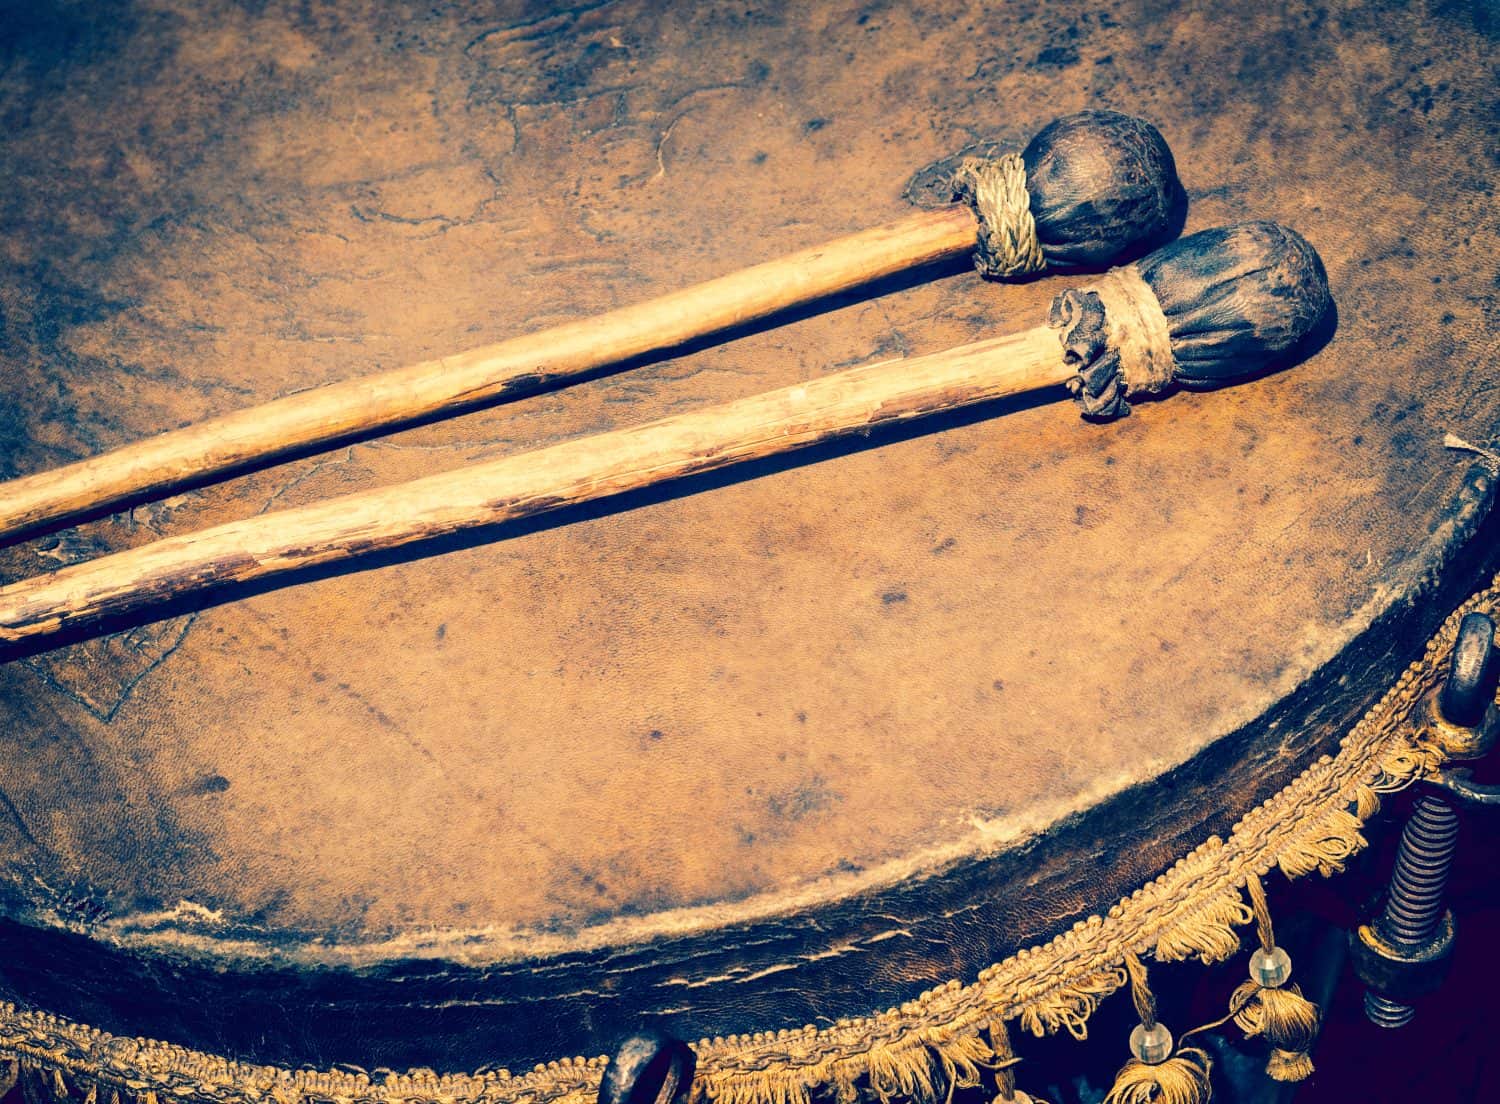 Old leather drum and drumsticks - membrane musical instrument. Ancient ethnic music on a folk festival. Timpani or kettledrums - old musical instruments in percussion family of classical orchestra.